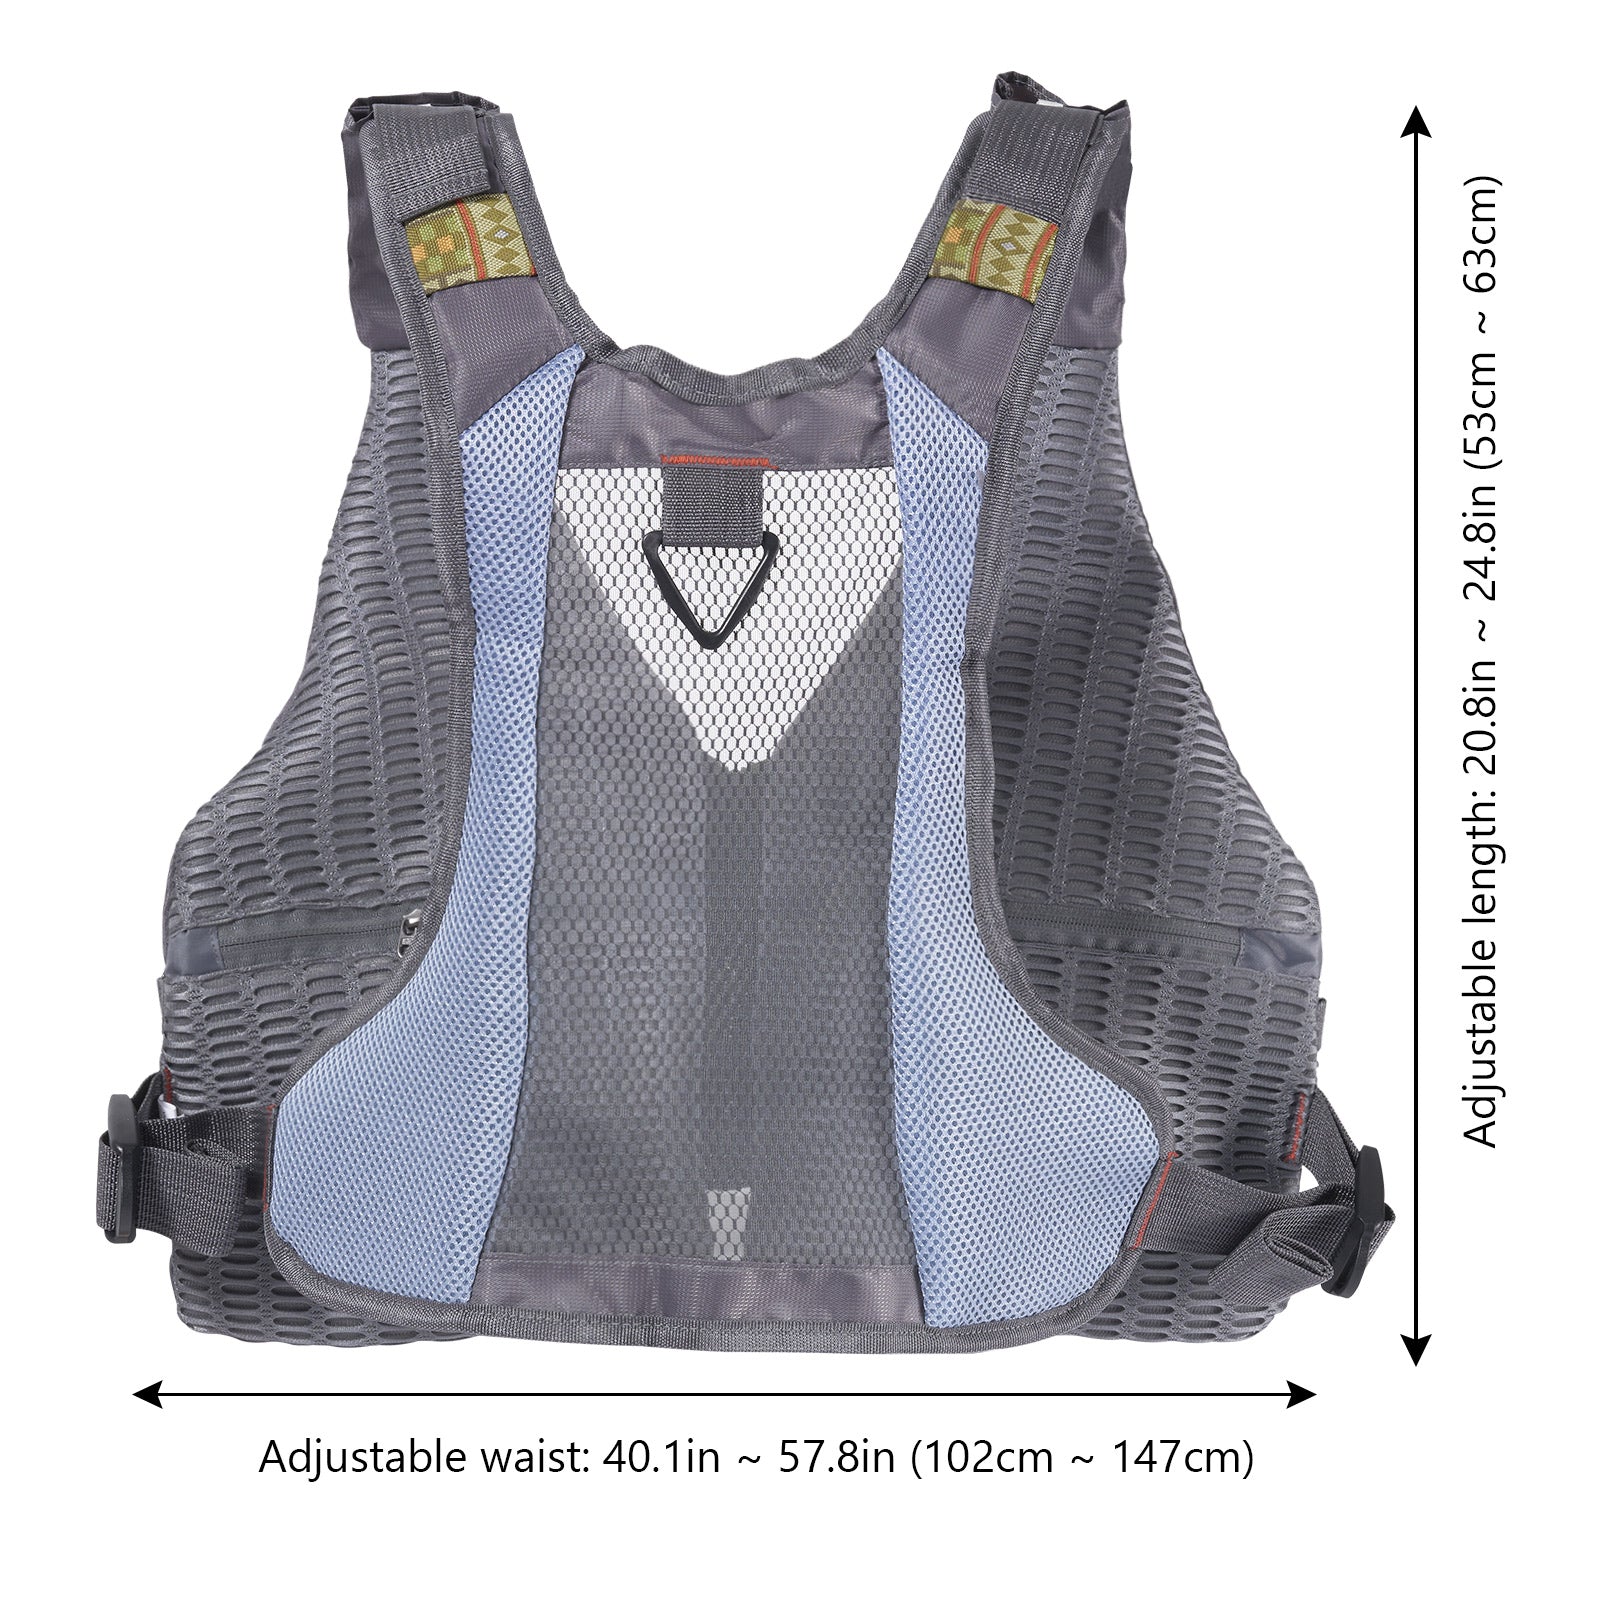 BASSDASH FV08 Ultra Lightweight Fly Fishing Vest for Men and Women Portable  Ches